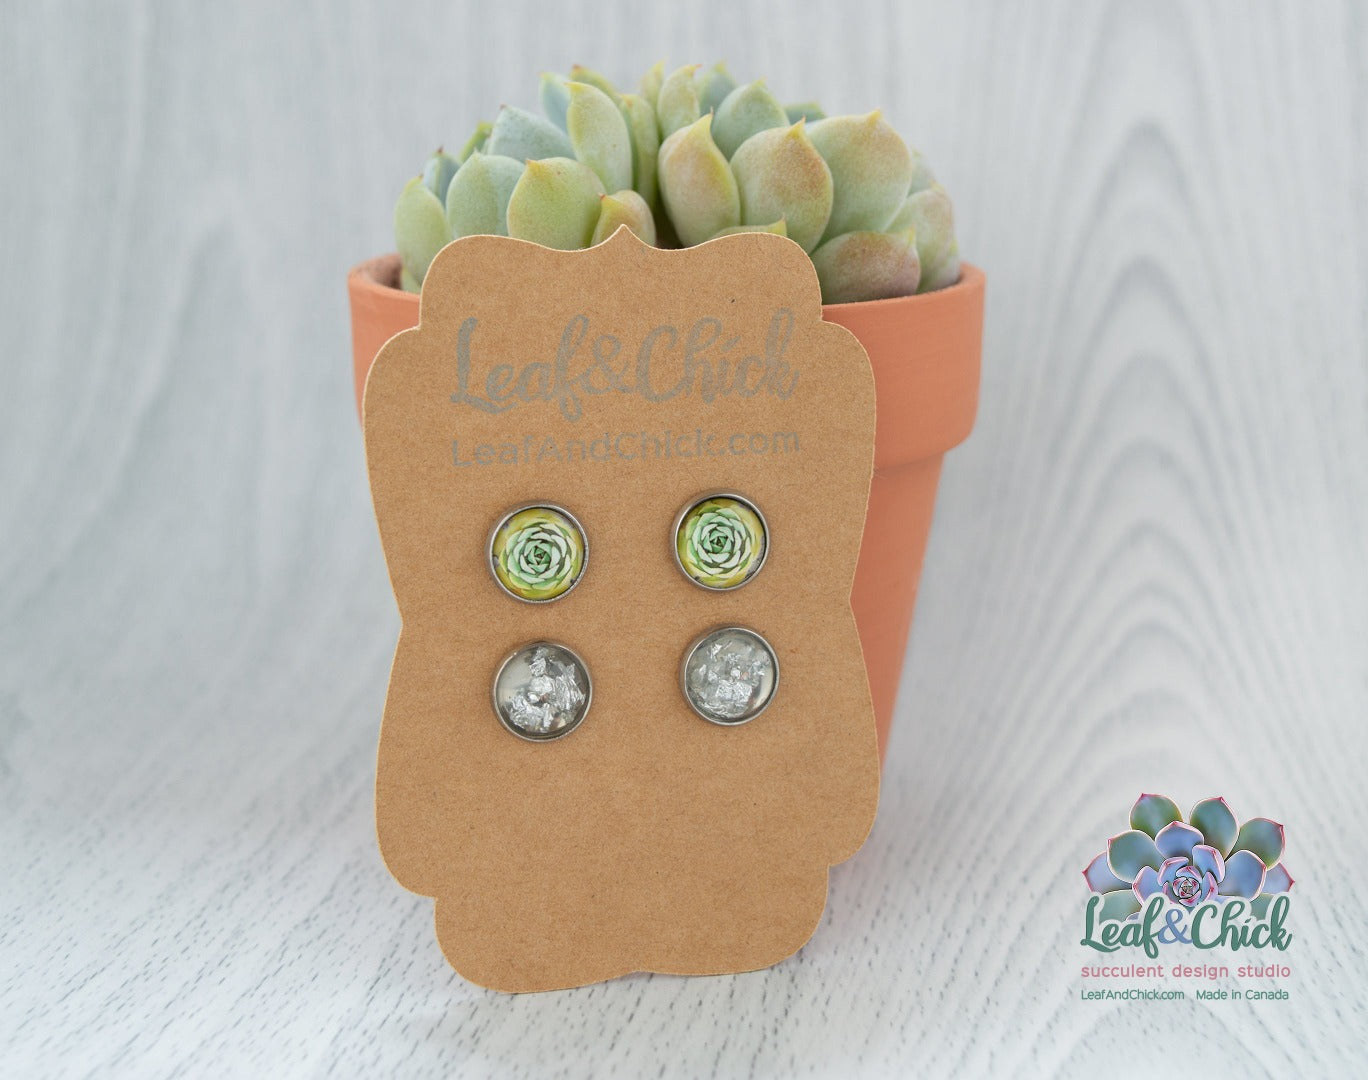 tiny stud earrings featuring yellow succulent art